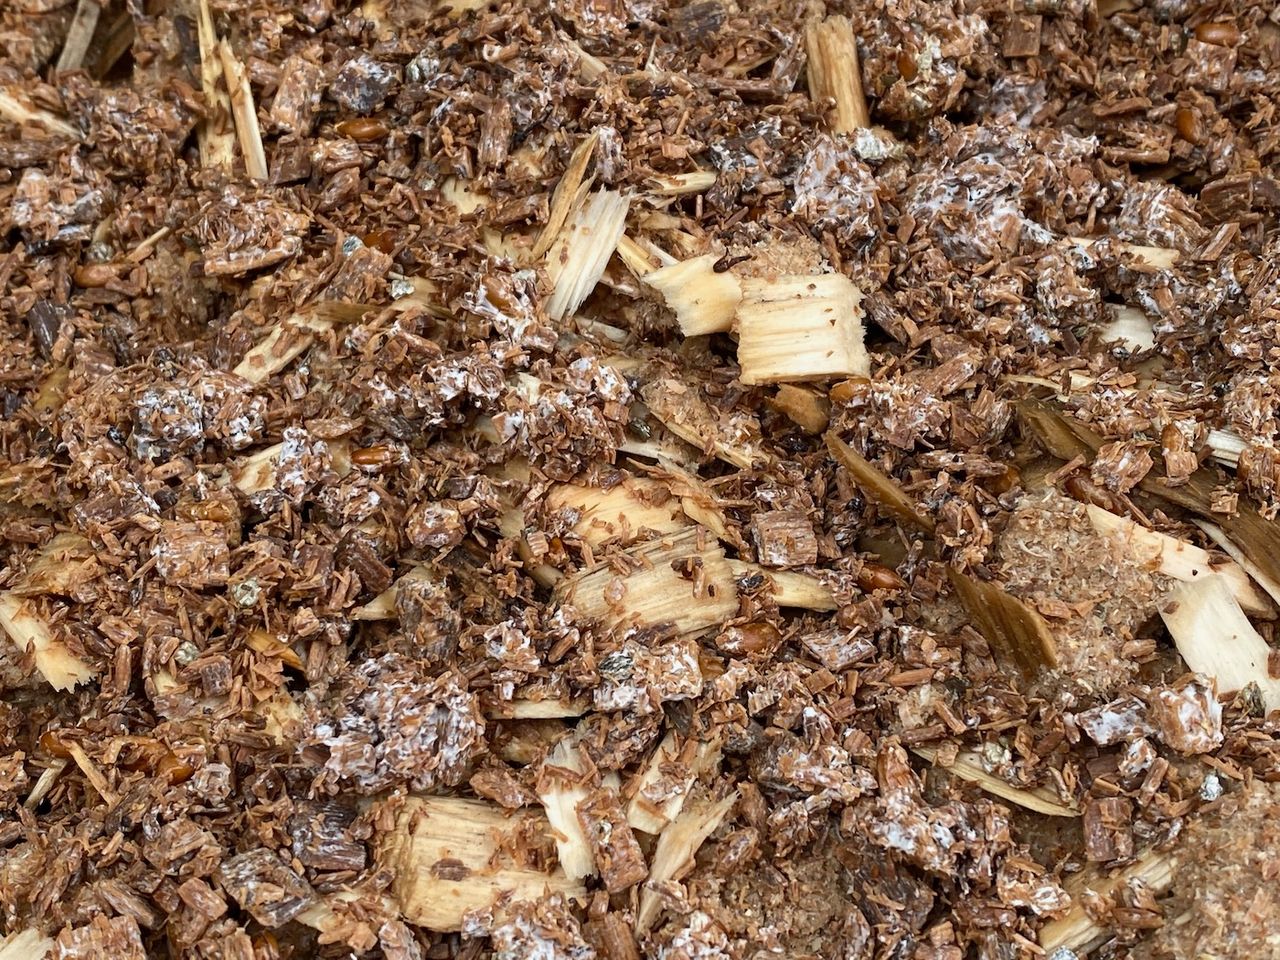 A close-up of the spawn, with both fresh wood chips and the mycelium-covered wood chips visible.